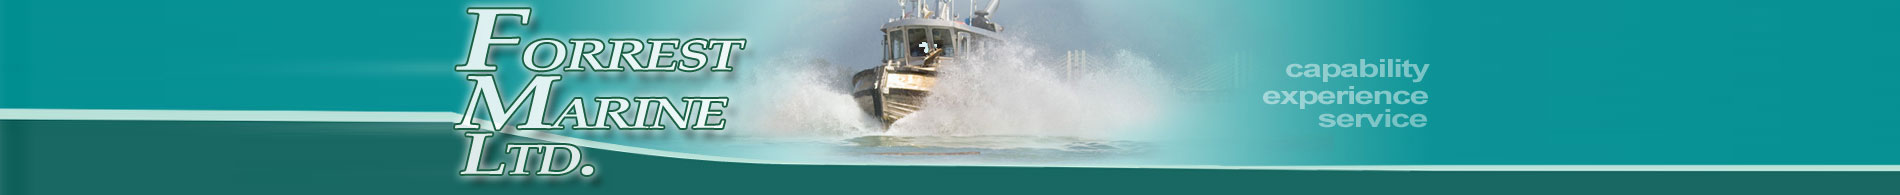 Forrest Marine Ltd. – Marine Services for the BC Lower Mainland